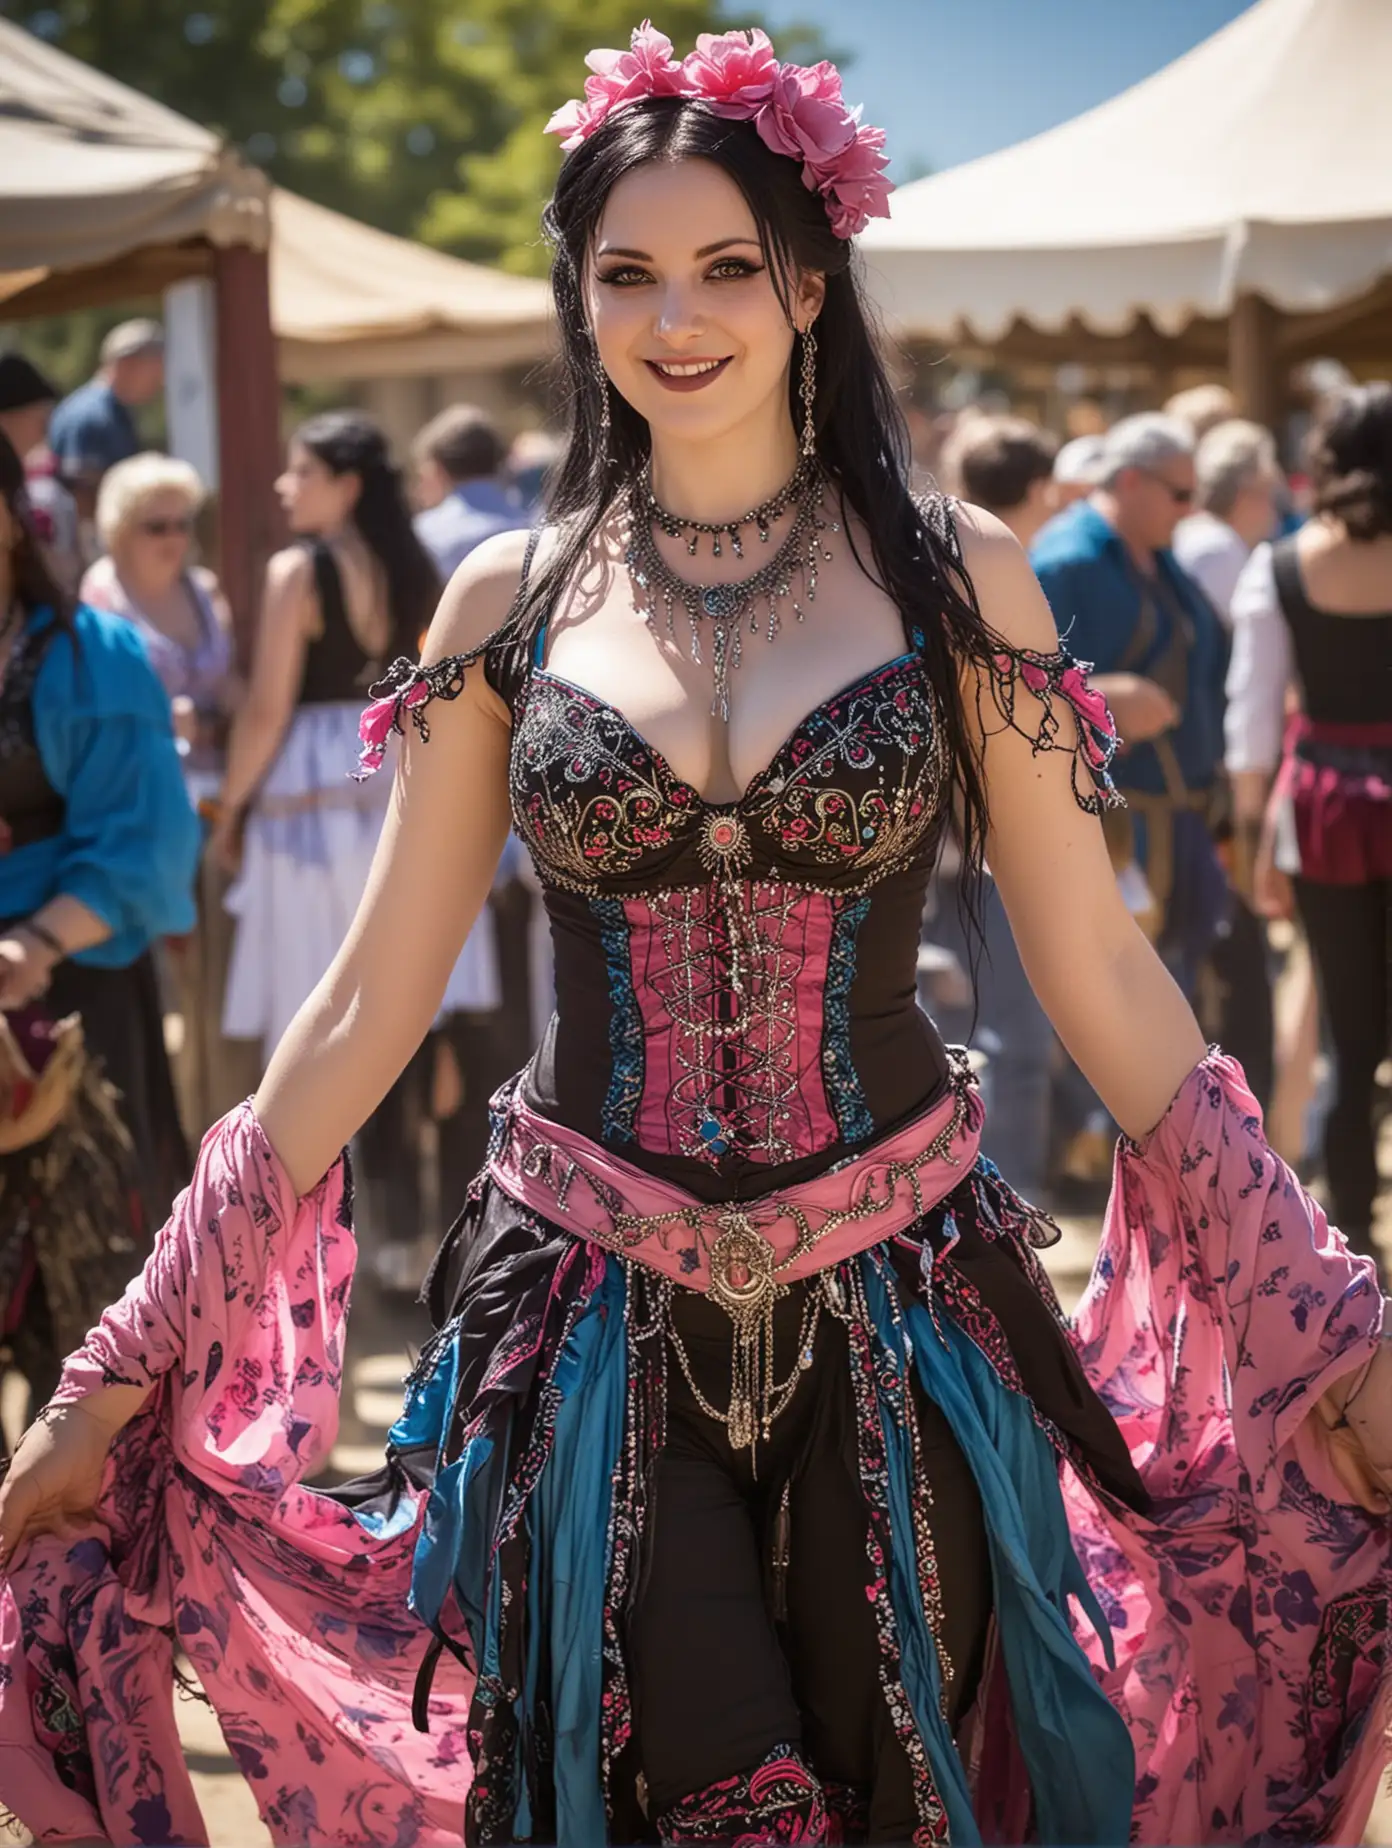 Whimsical Goth Dancer at RenFaire in Colorful Outfit